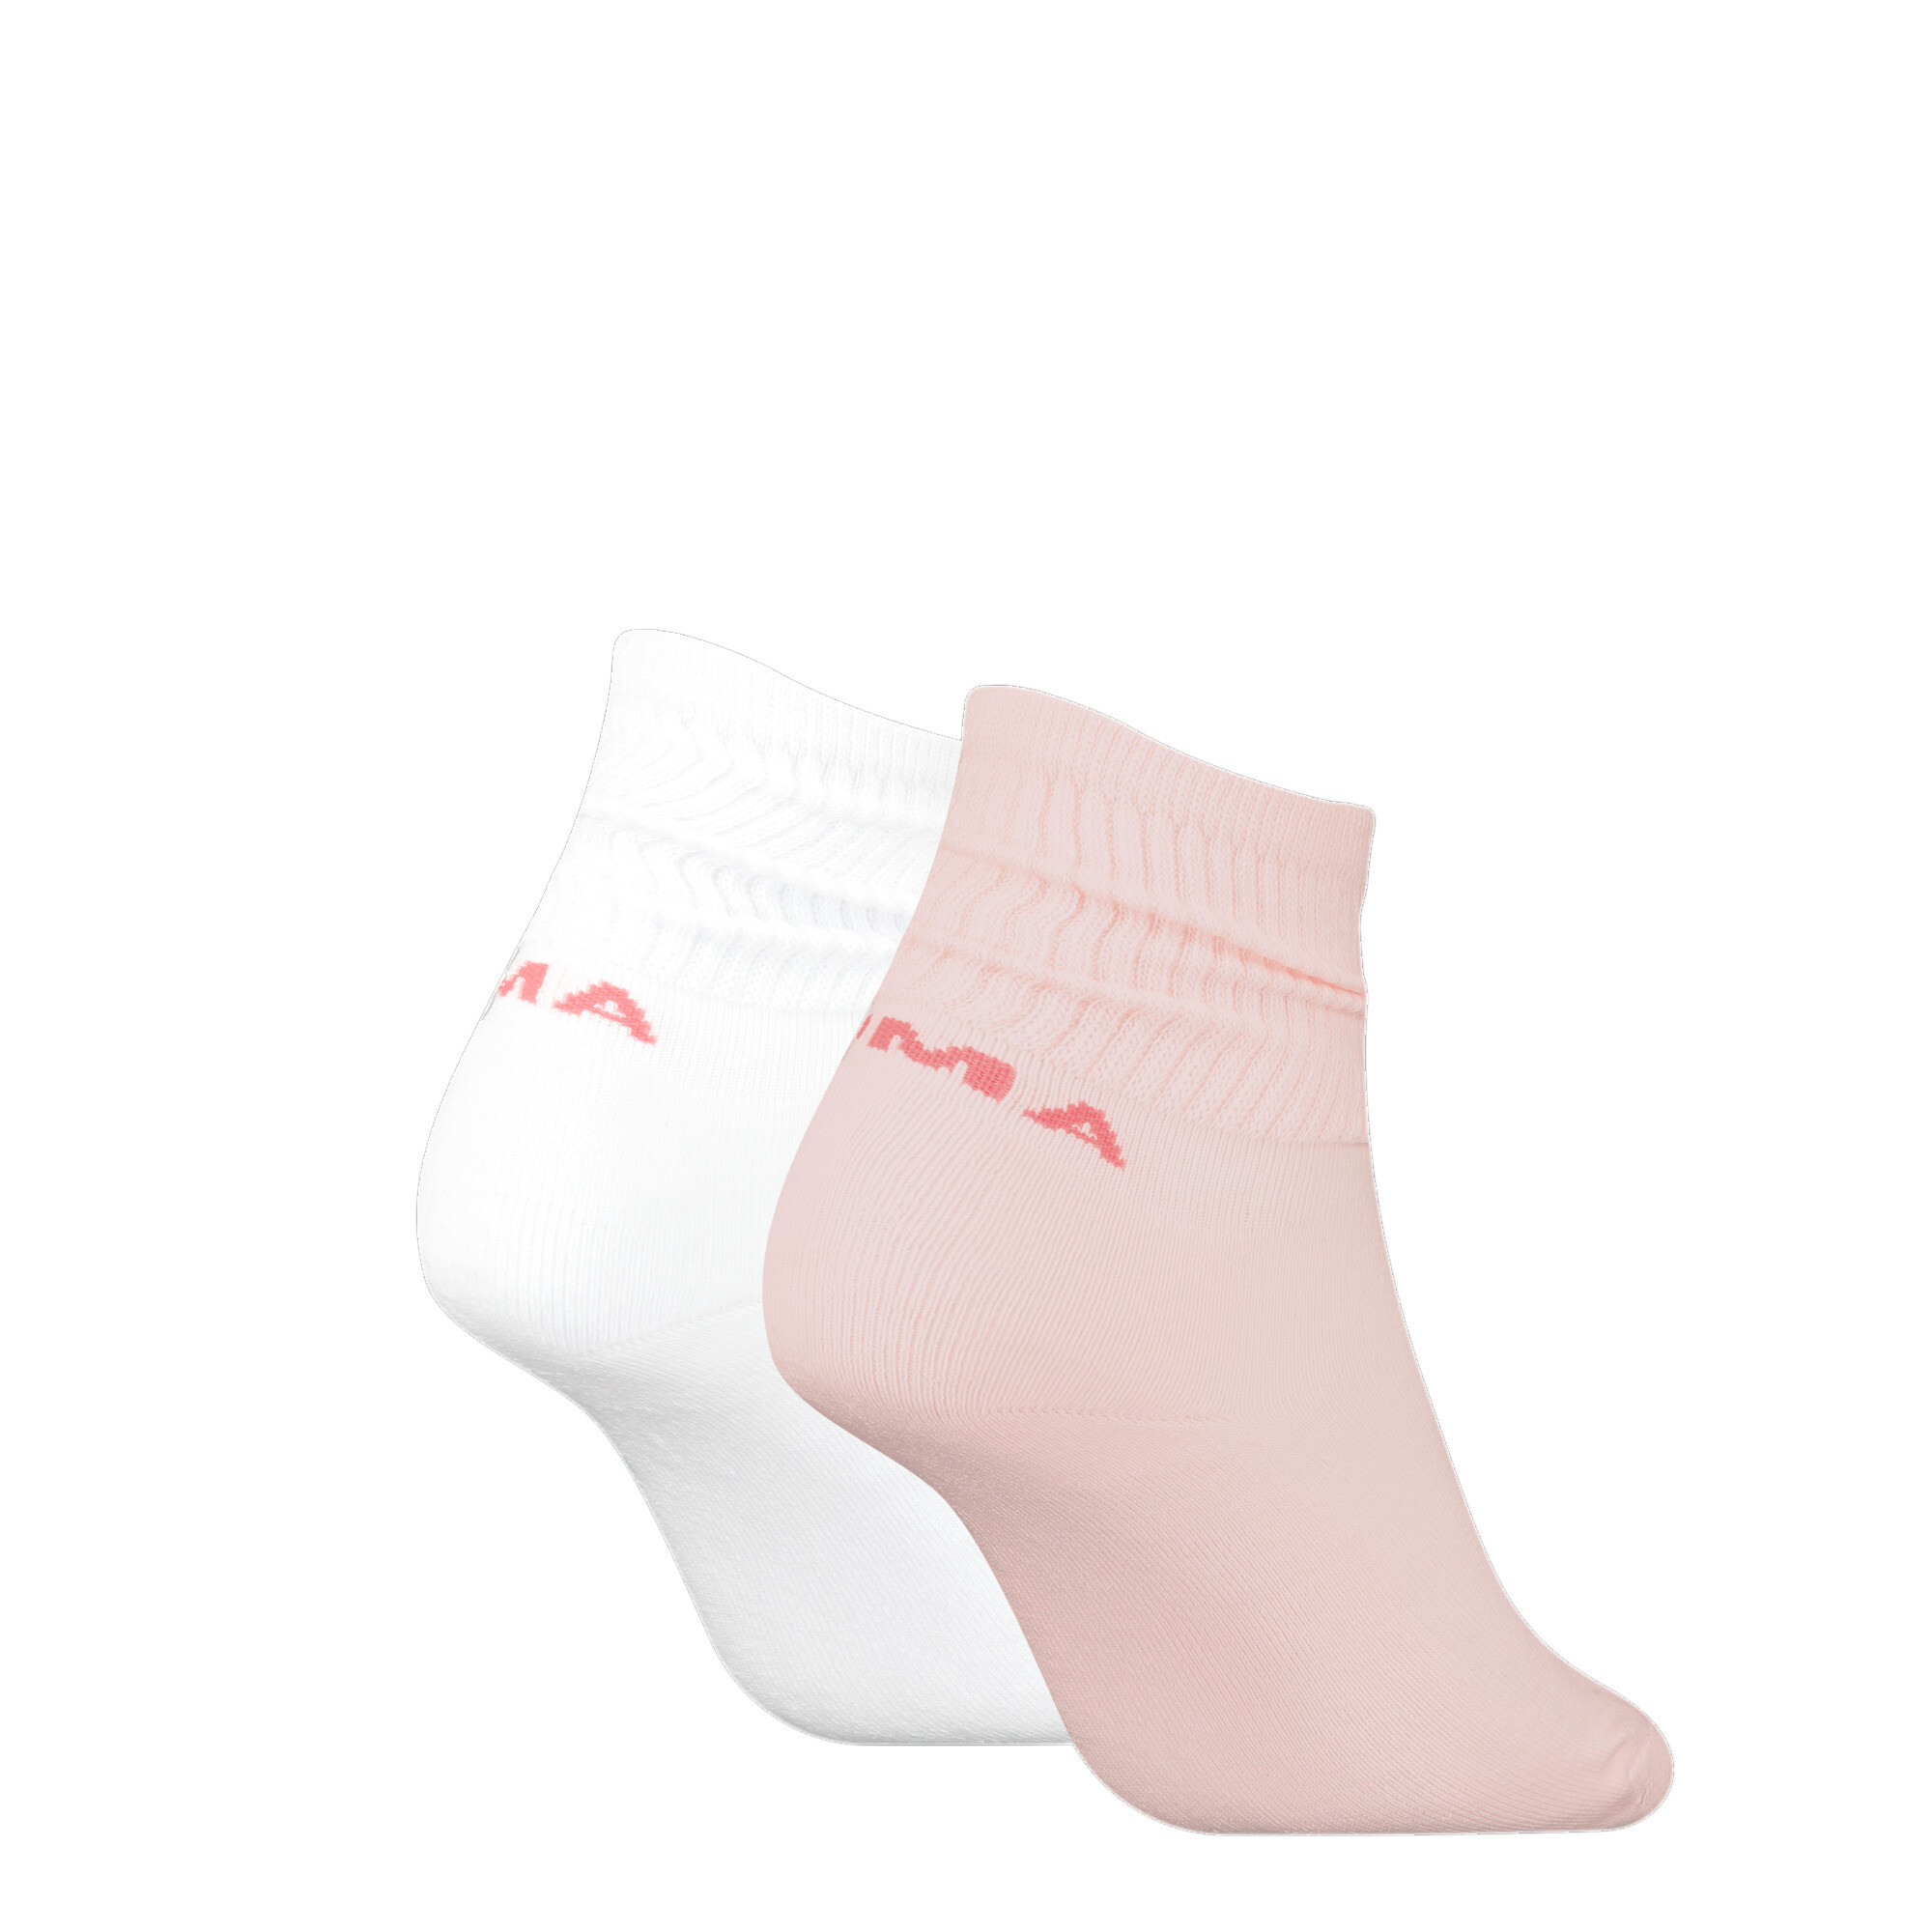 Women's PUMA Slouch Crew Socks 2 Pack In Pink, Size 35-38